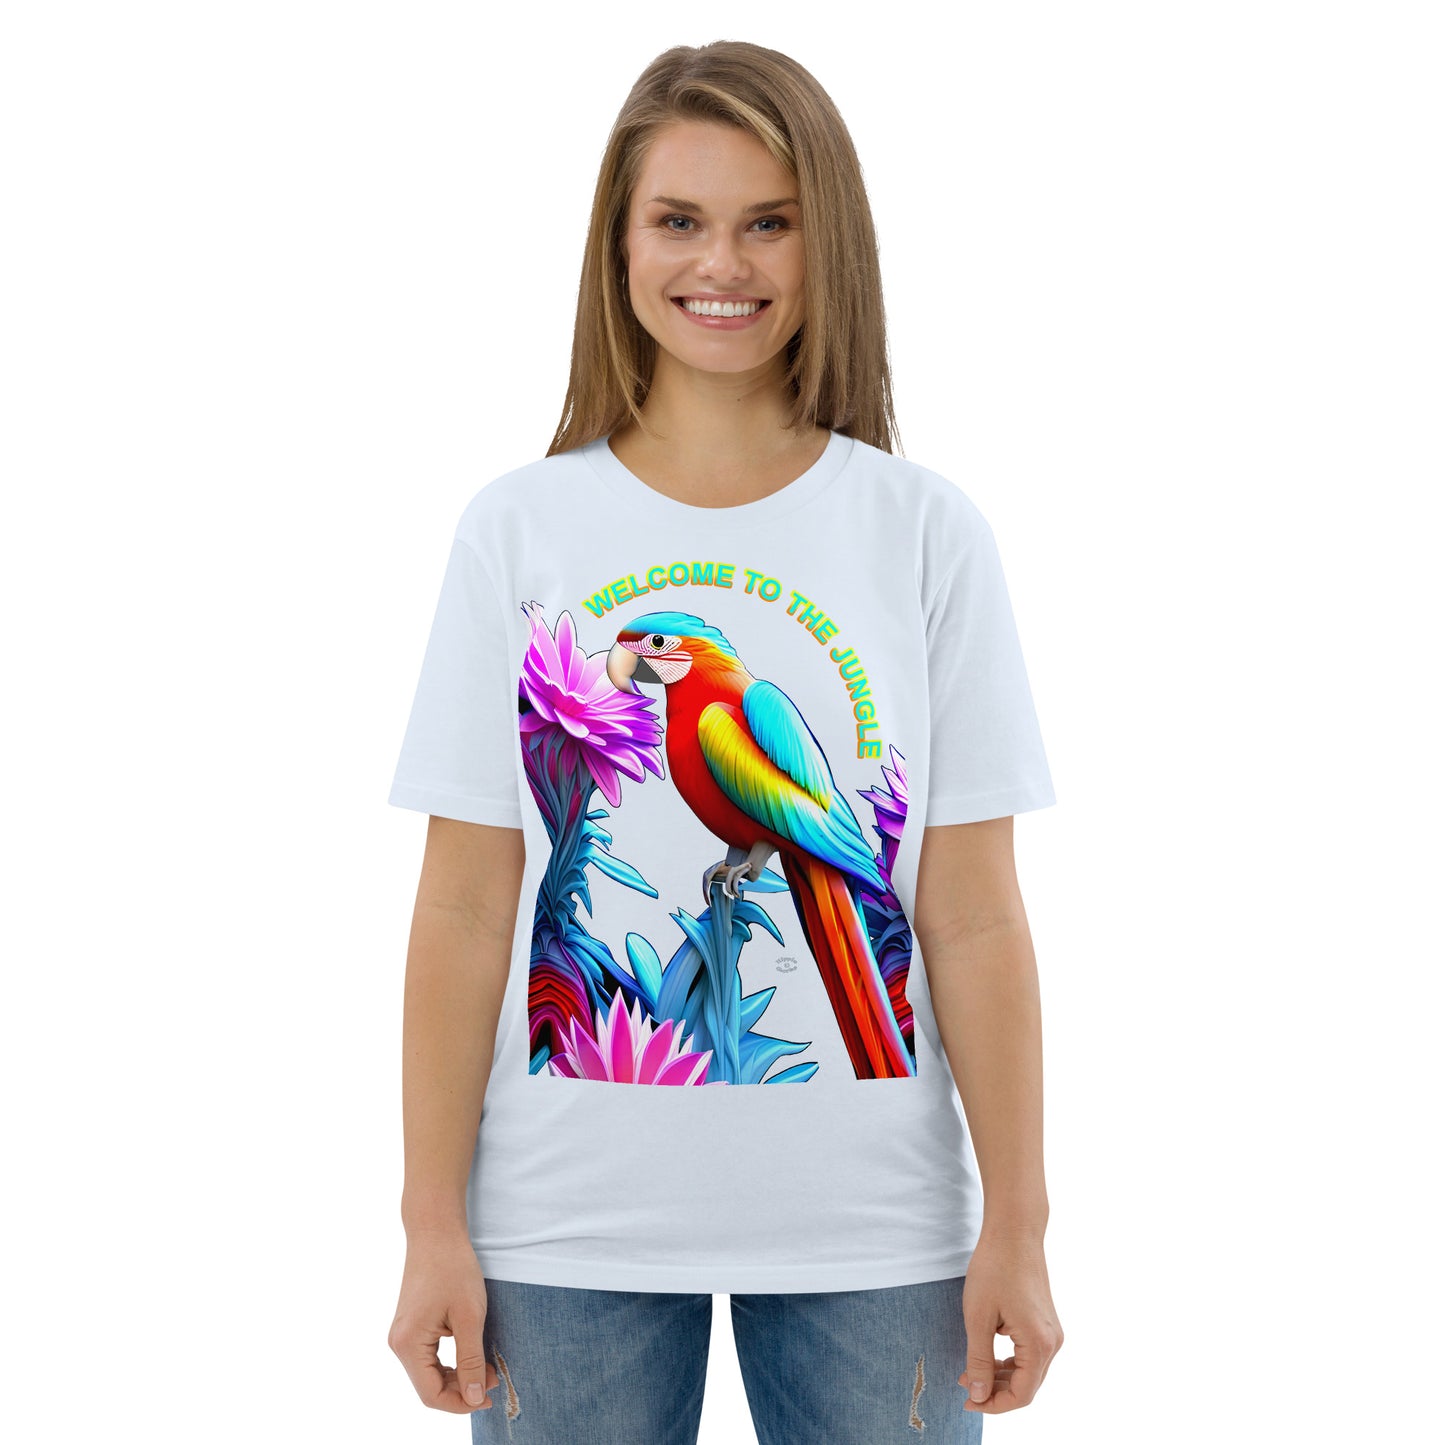 "Jungle Macaw - Welcome To The Jungle" Unisex Organic Cotton T-Shirt